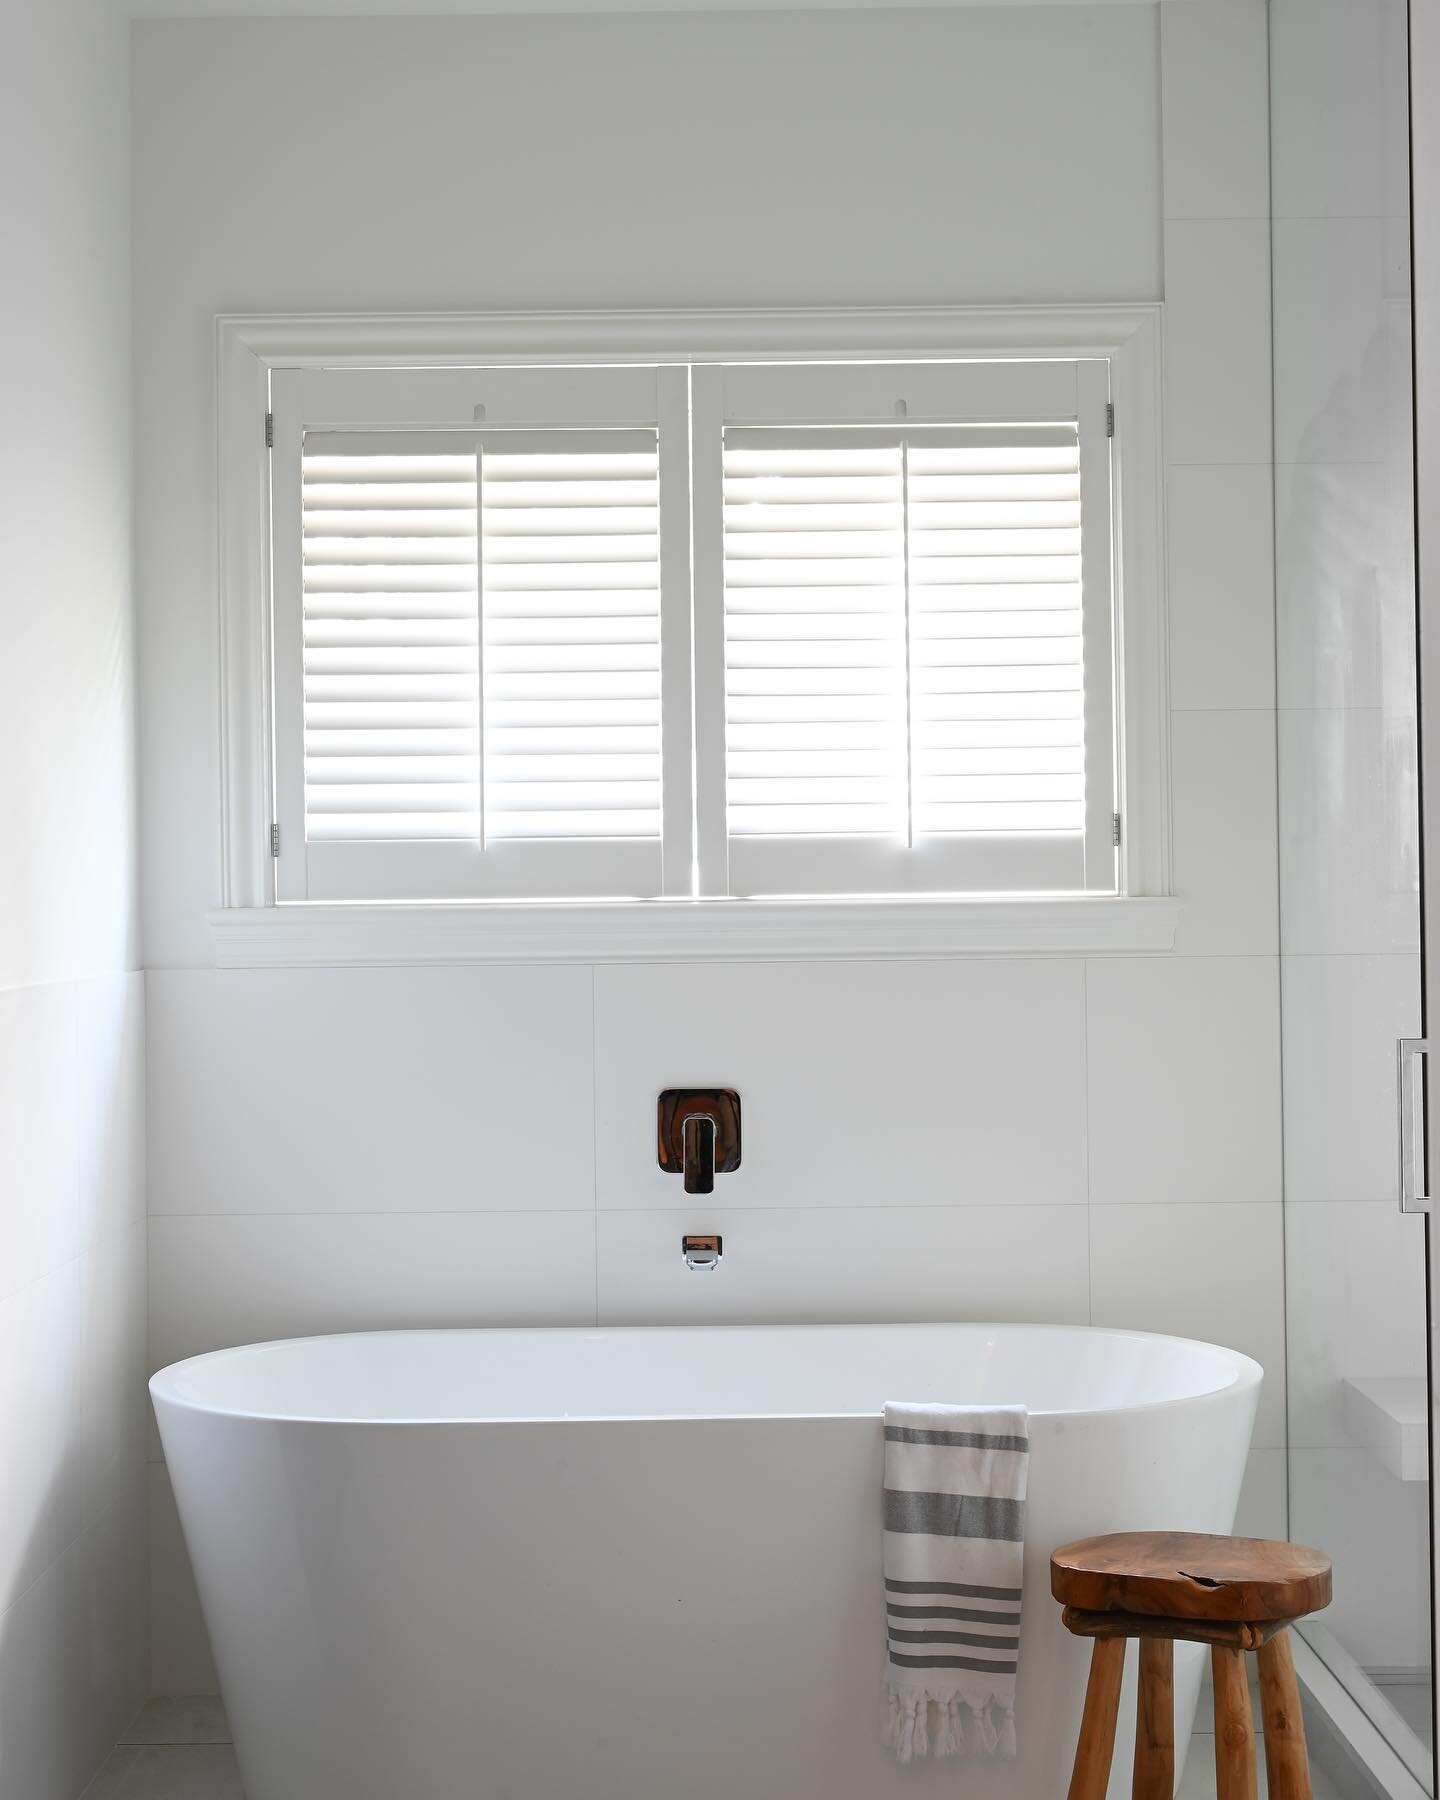 Hands up if you have California shutters 🙋
We still love them, and in the right location, they are beautiful and practical. But, we frequently help clients find alternative solutions. When fully open, shutters  block up to 40% of natural light, and 